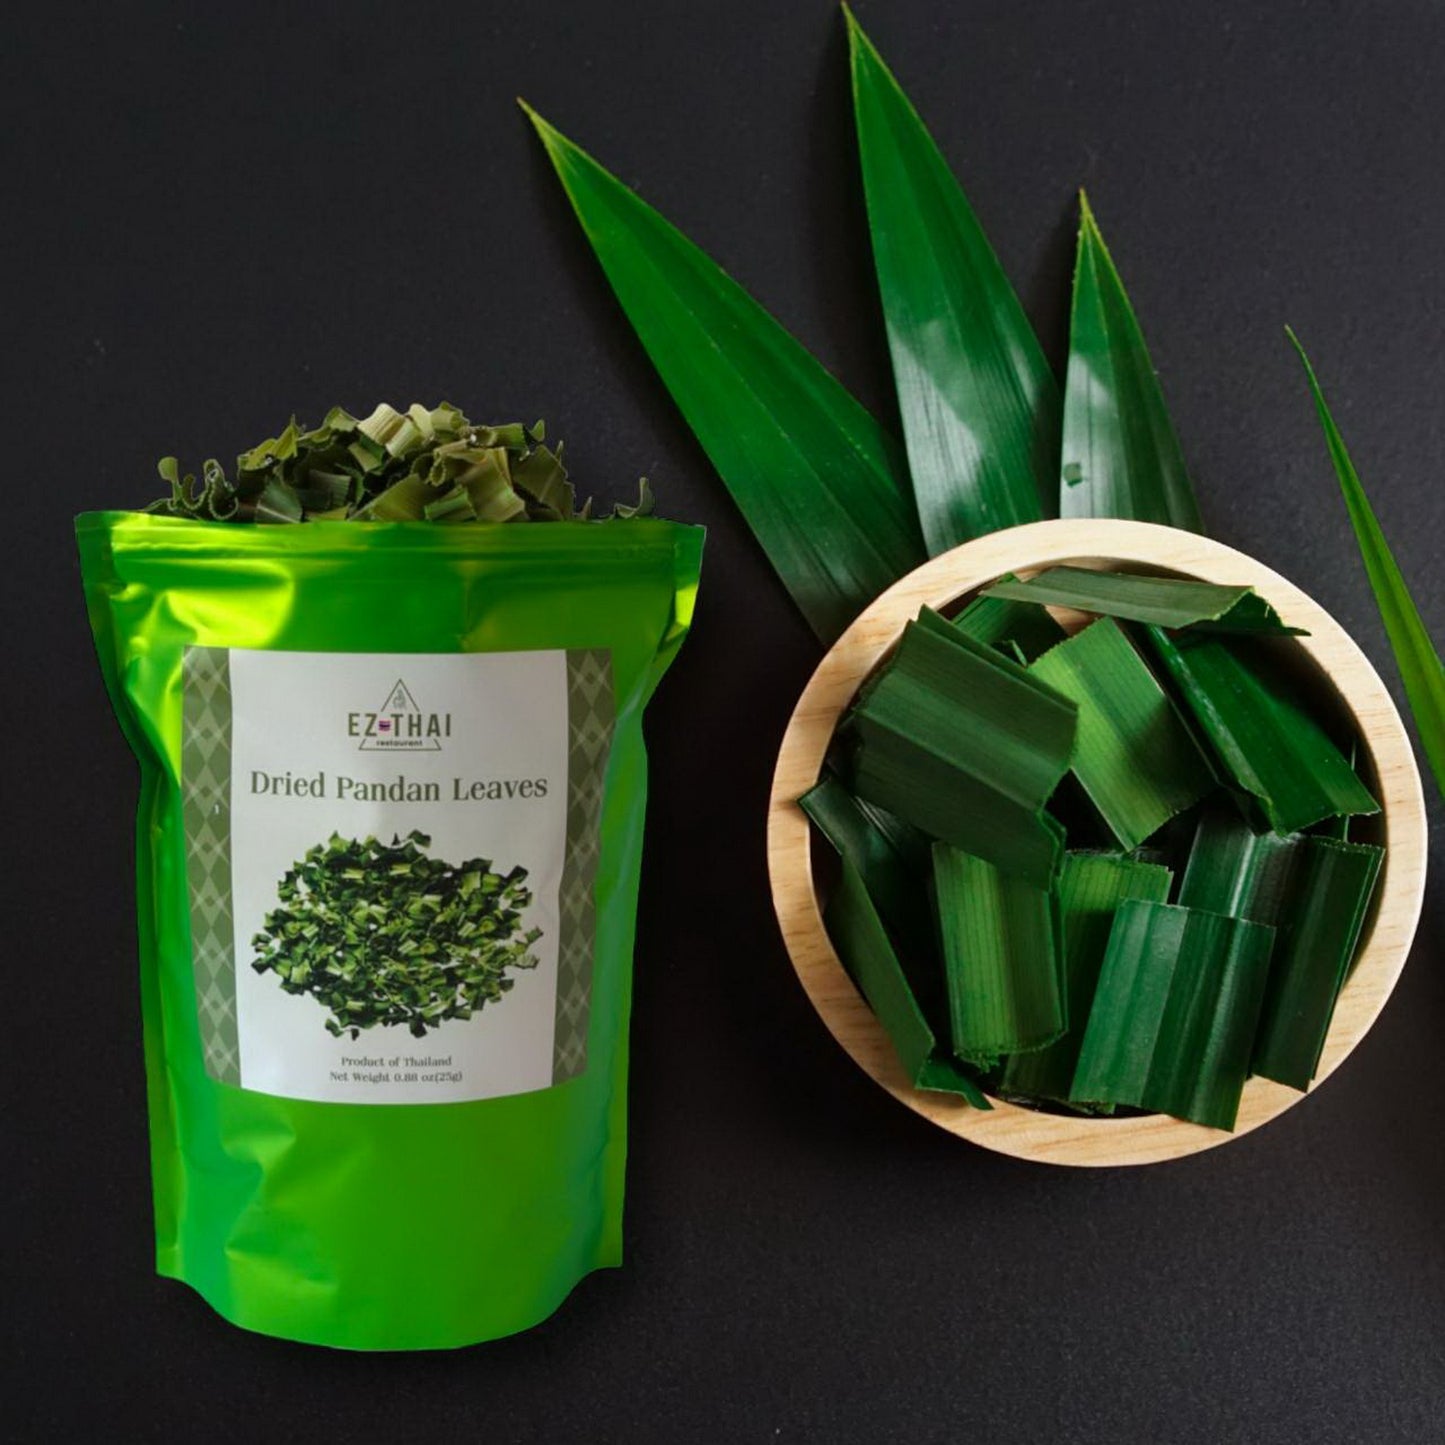 Dried Pandan Leaves 1oz Aromatic Flavor Cooking Baking Tea Dessert Dried Pandan Leaves 1oz Aromatic Flavor Cooking Baking Tea Dessert EZTHAI EZTHAI.